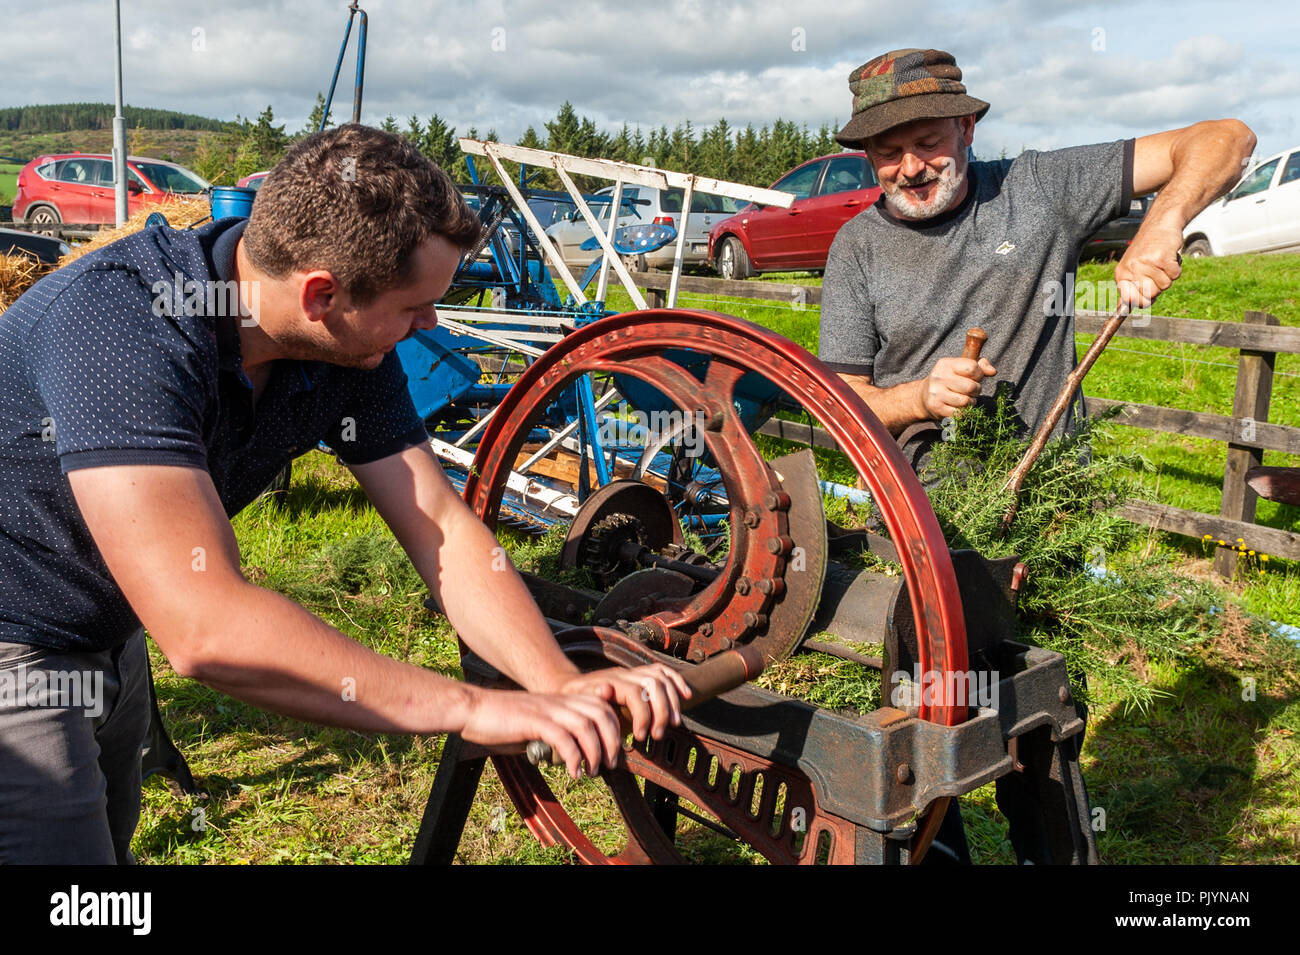 Dunmanway, West Cork, Ireland. 9th Sept, 2018. As part of the Sam Maguire weekend, a threshing event was held at Malabracka, the Sam Maguire Homestead. Demonstrating Furze cutting for horse feed were Jerry Brennan and Denis Murphy from Dunmanway. Credit: Andy Gibson/Alamy Live News. Stock Photo